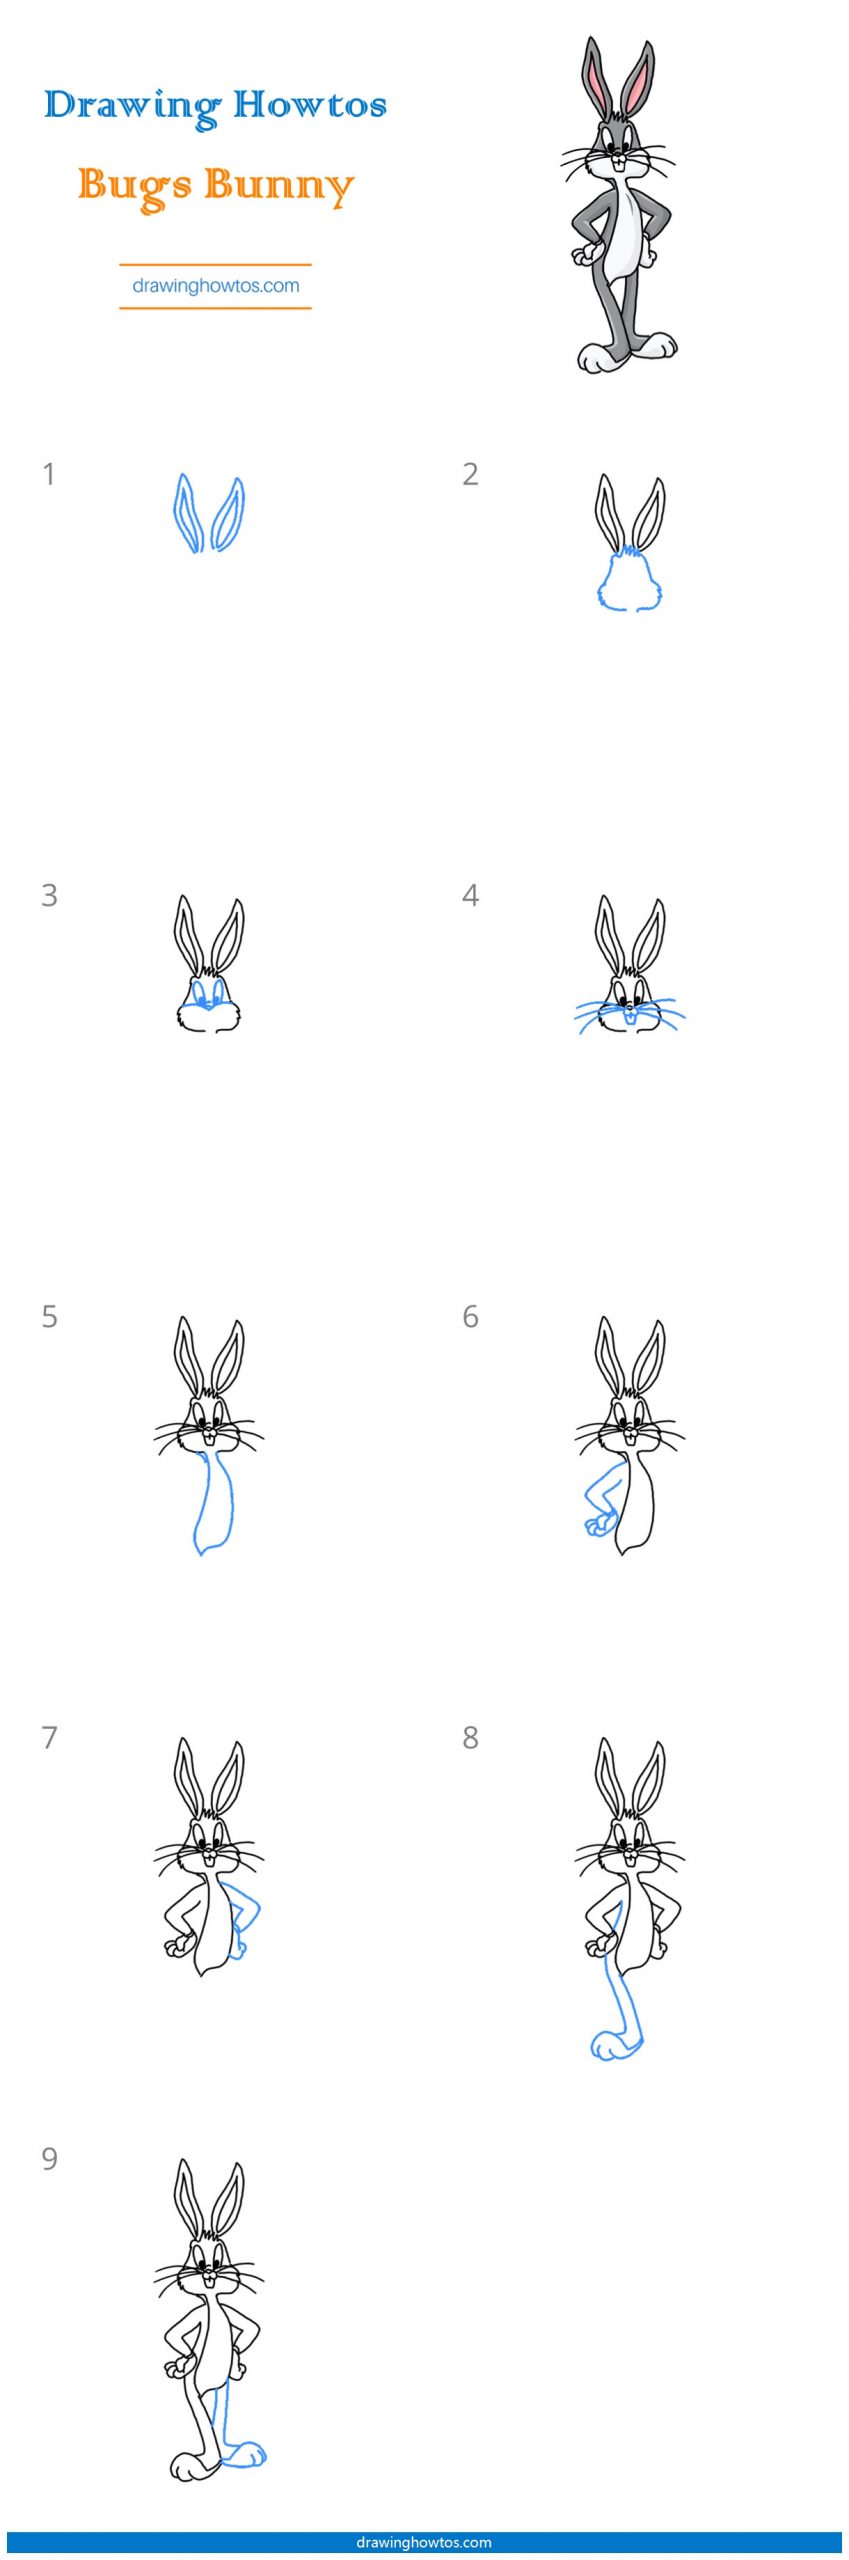 How to Draw a Bugs Bunny Step by Step